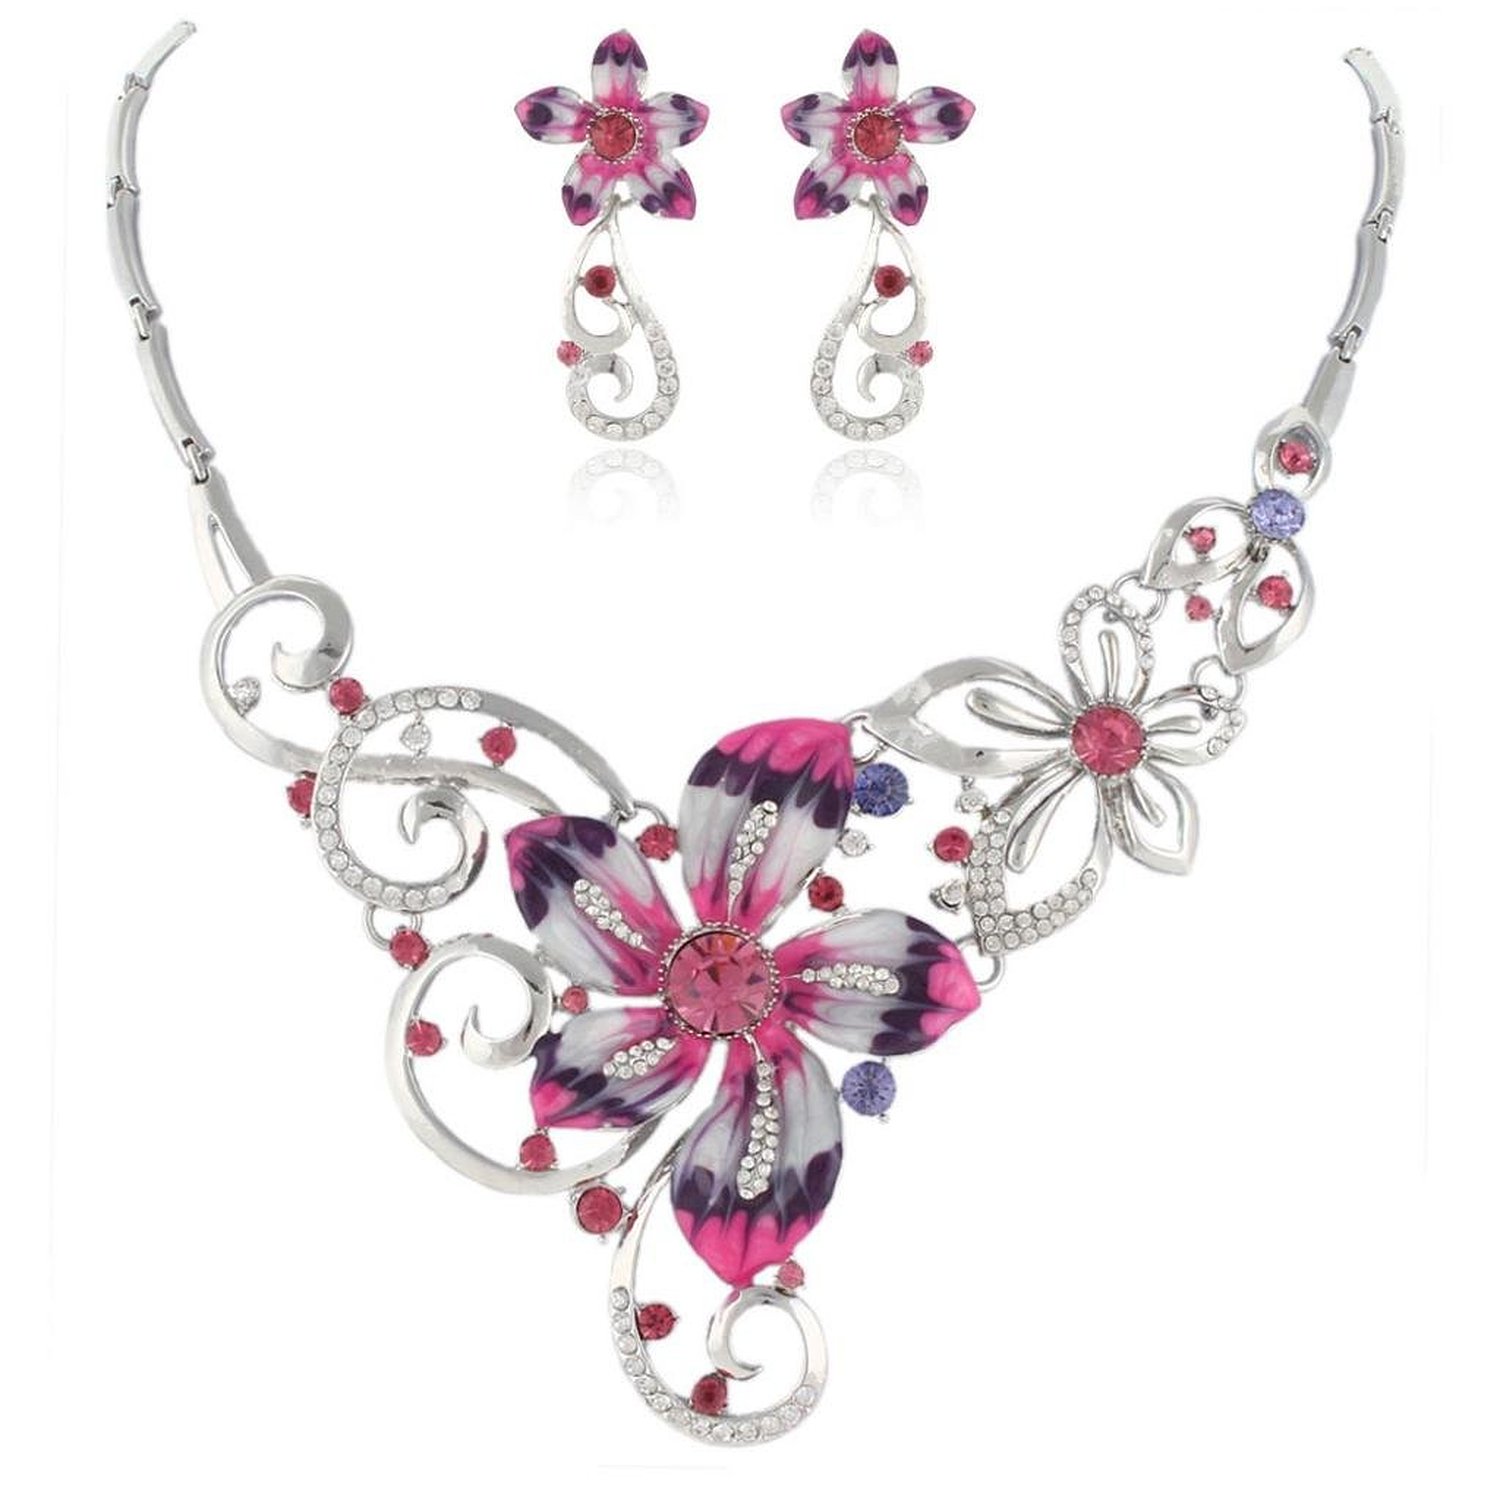 EVER FAITH Enamel Orchid Flower Necklace Earings Set Pink Austrian Crystal Silver-Tone N03498-3